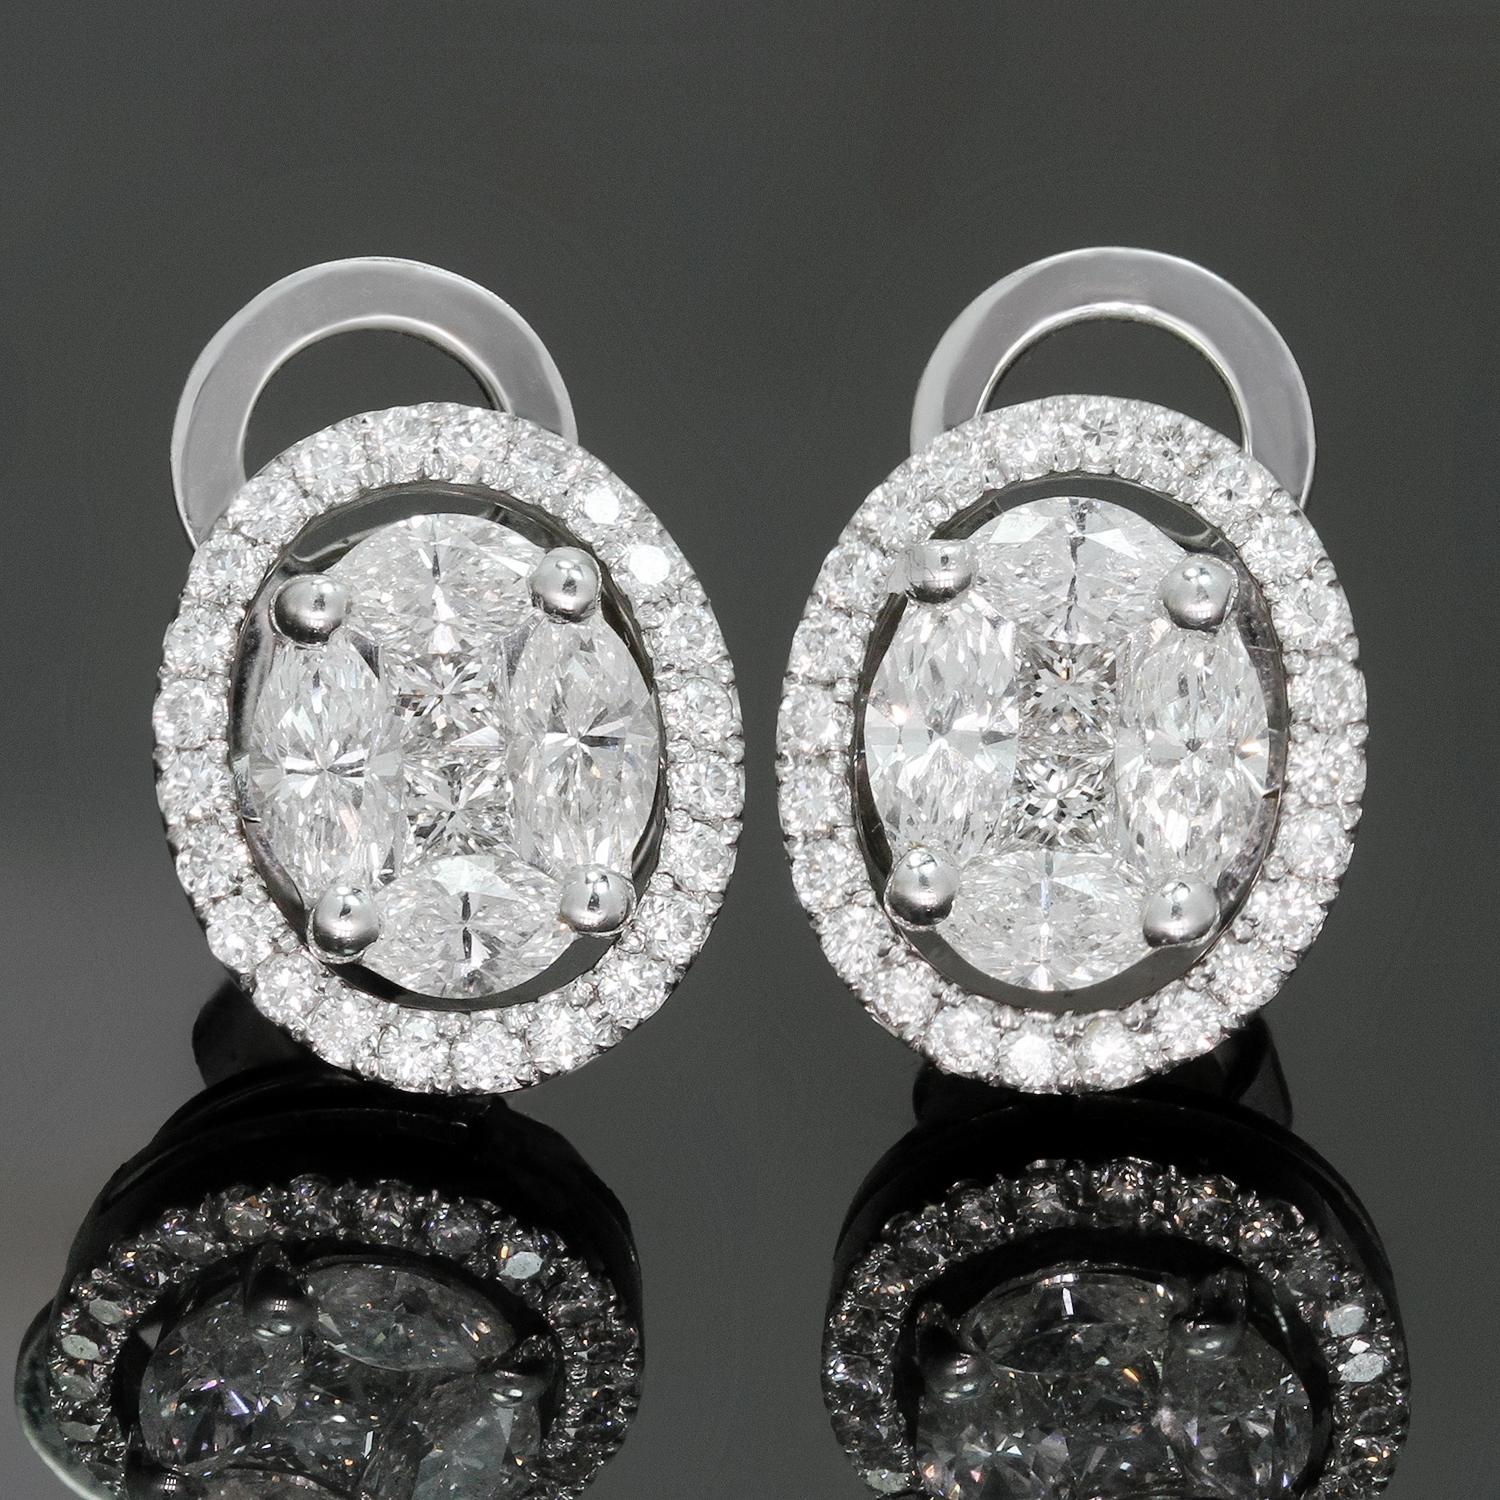 These classic earrings feature an oval design crafted in 18k white gold and set with marquise-shaped diamonds weighing an estimated 1.00 carat, accented with square brilliant-cut diamonds weighing an estimated 0.20 carats and completed with earring